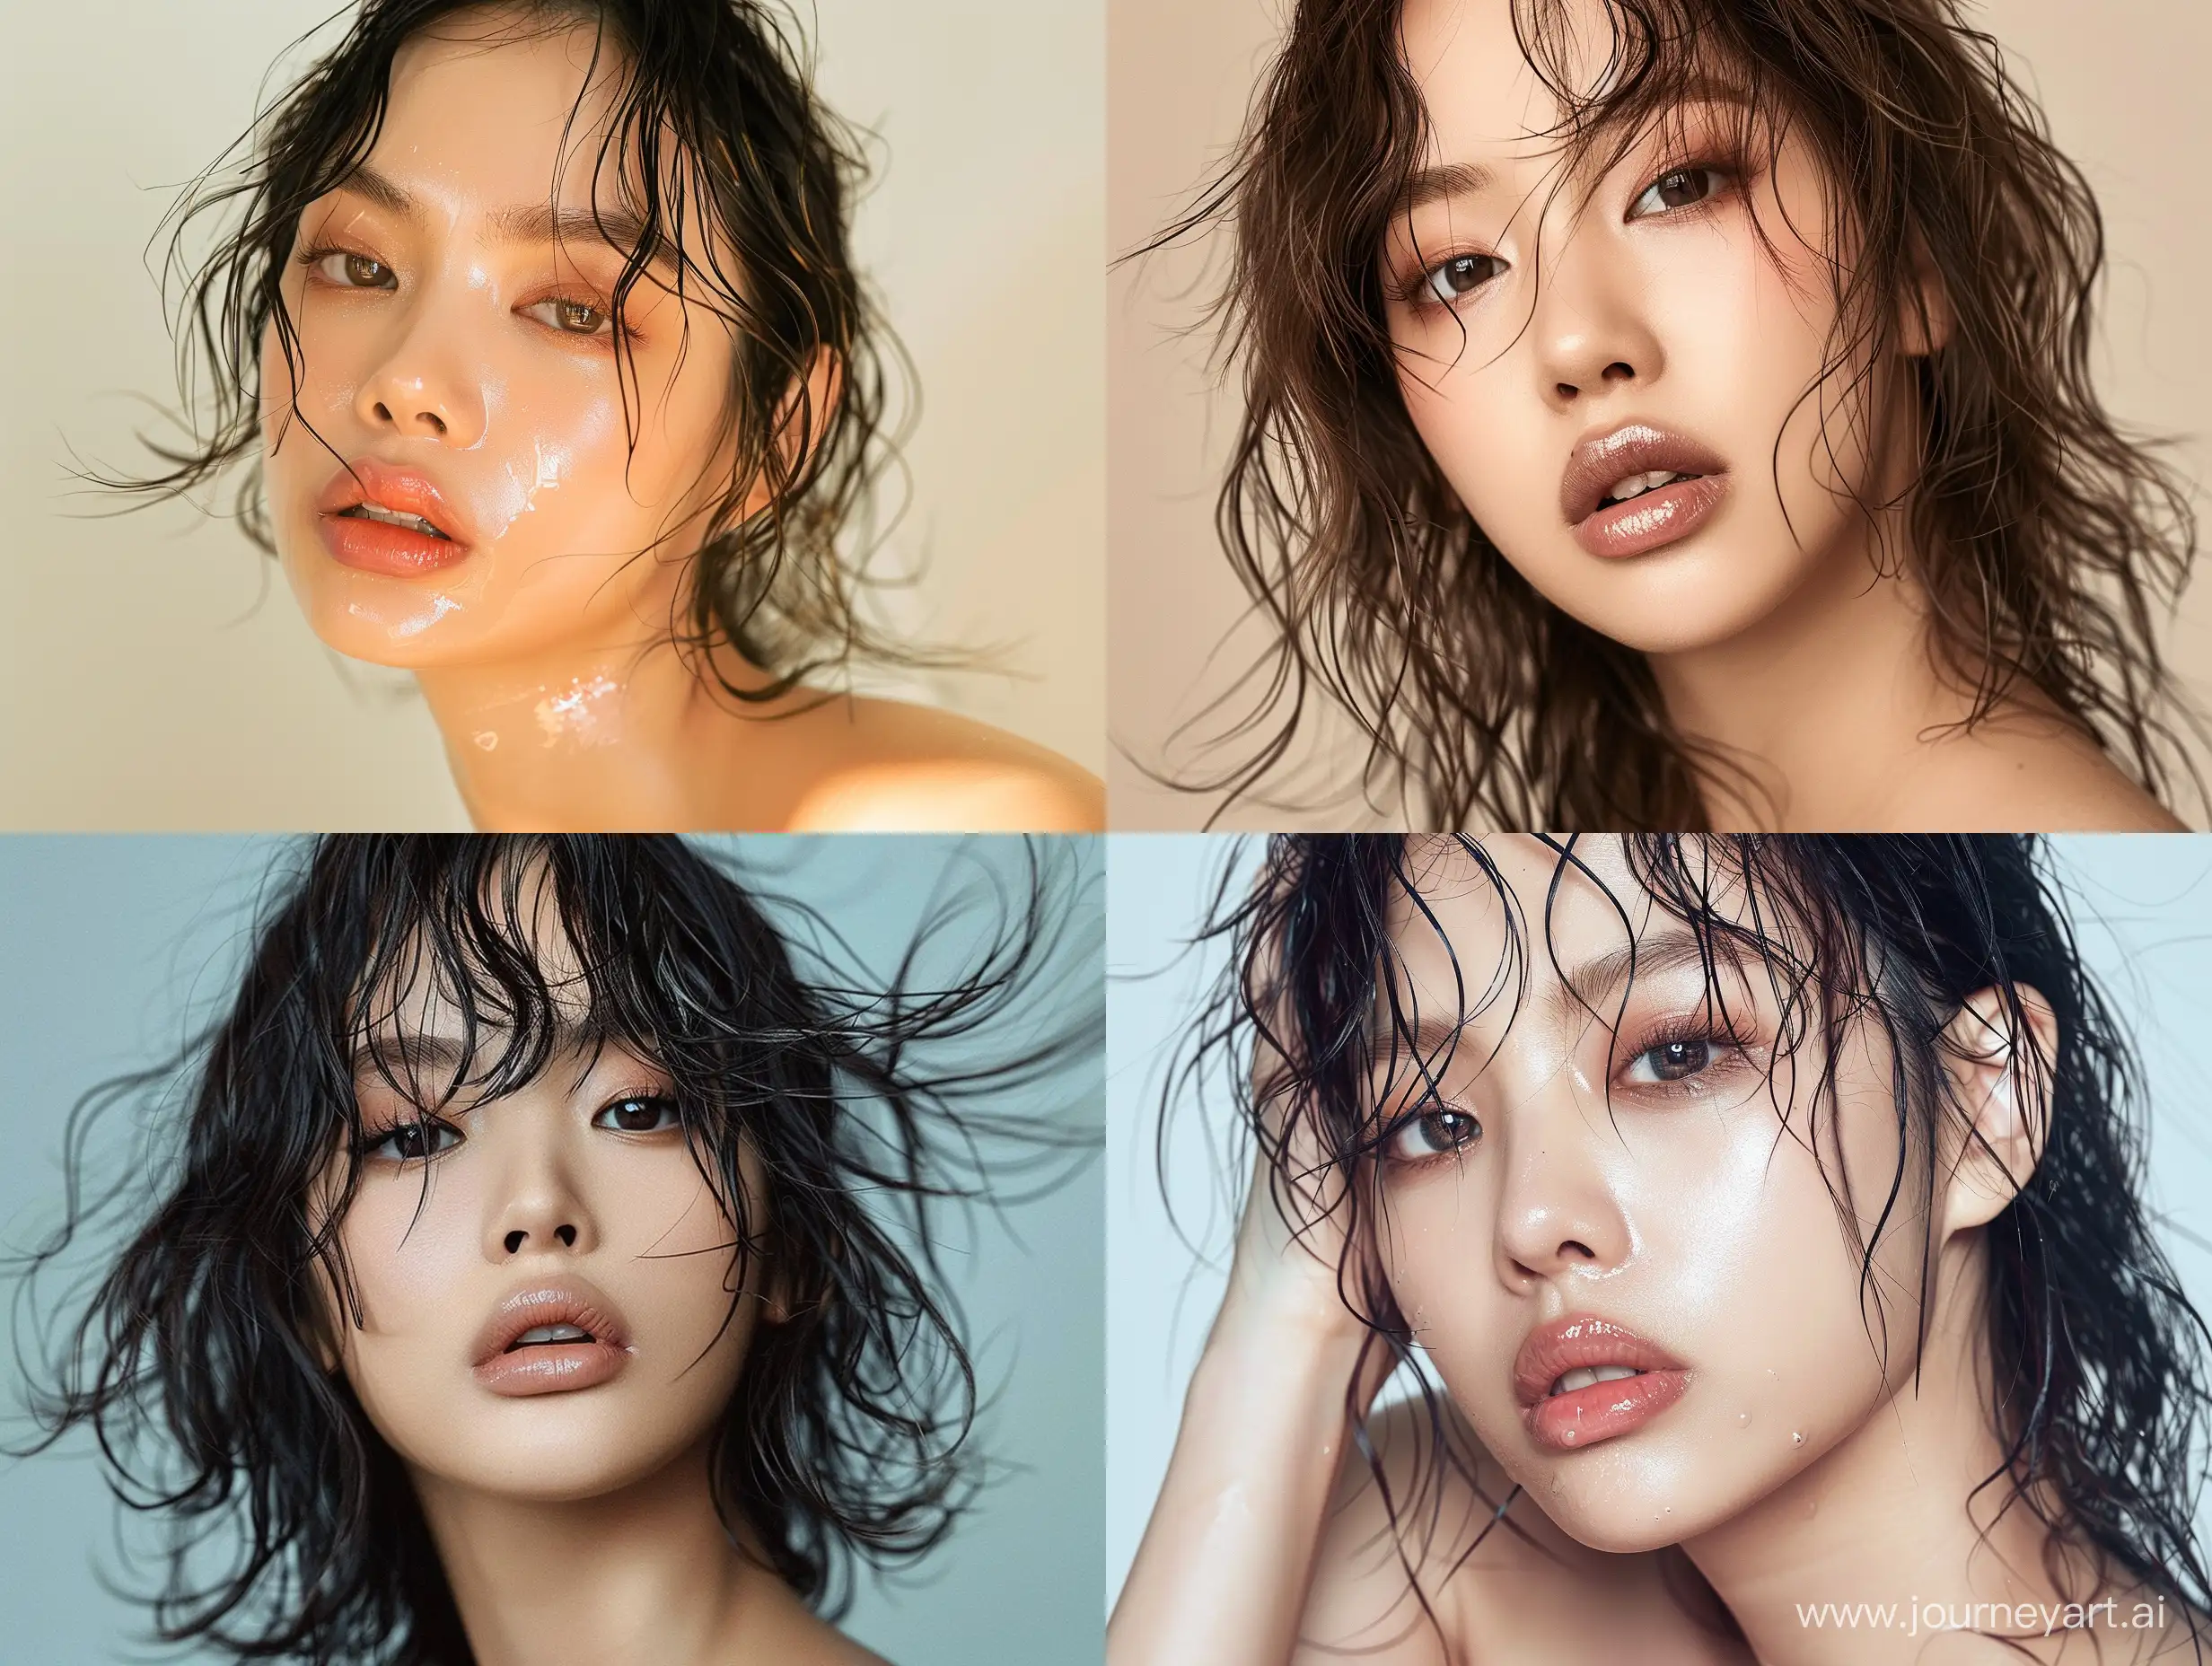 A beautiful Asian woman with wide-set eyes, a youthful appearance, and facial features resembling Blackpink's Jennie. wolfcut wavy hair is posing, balenciaga style